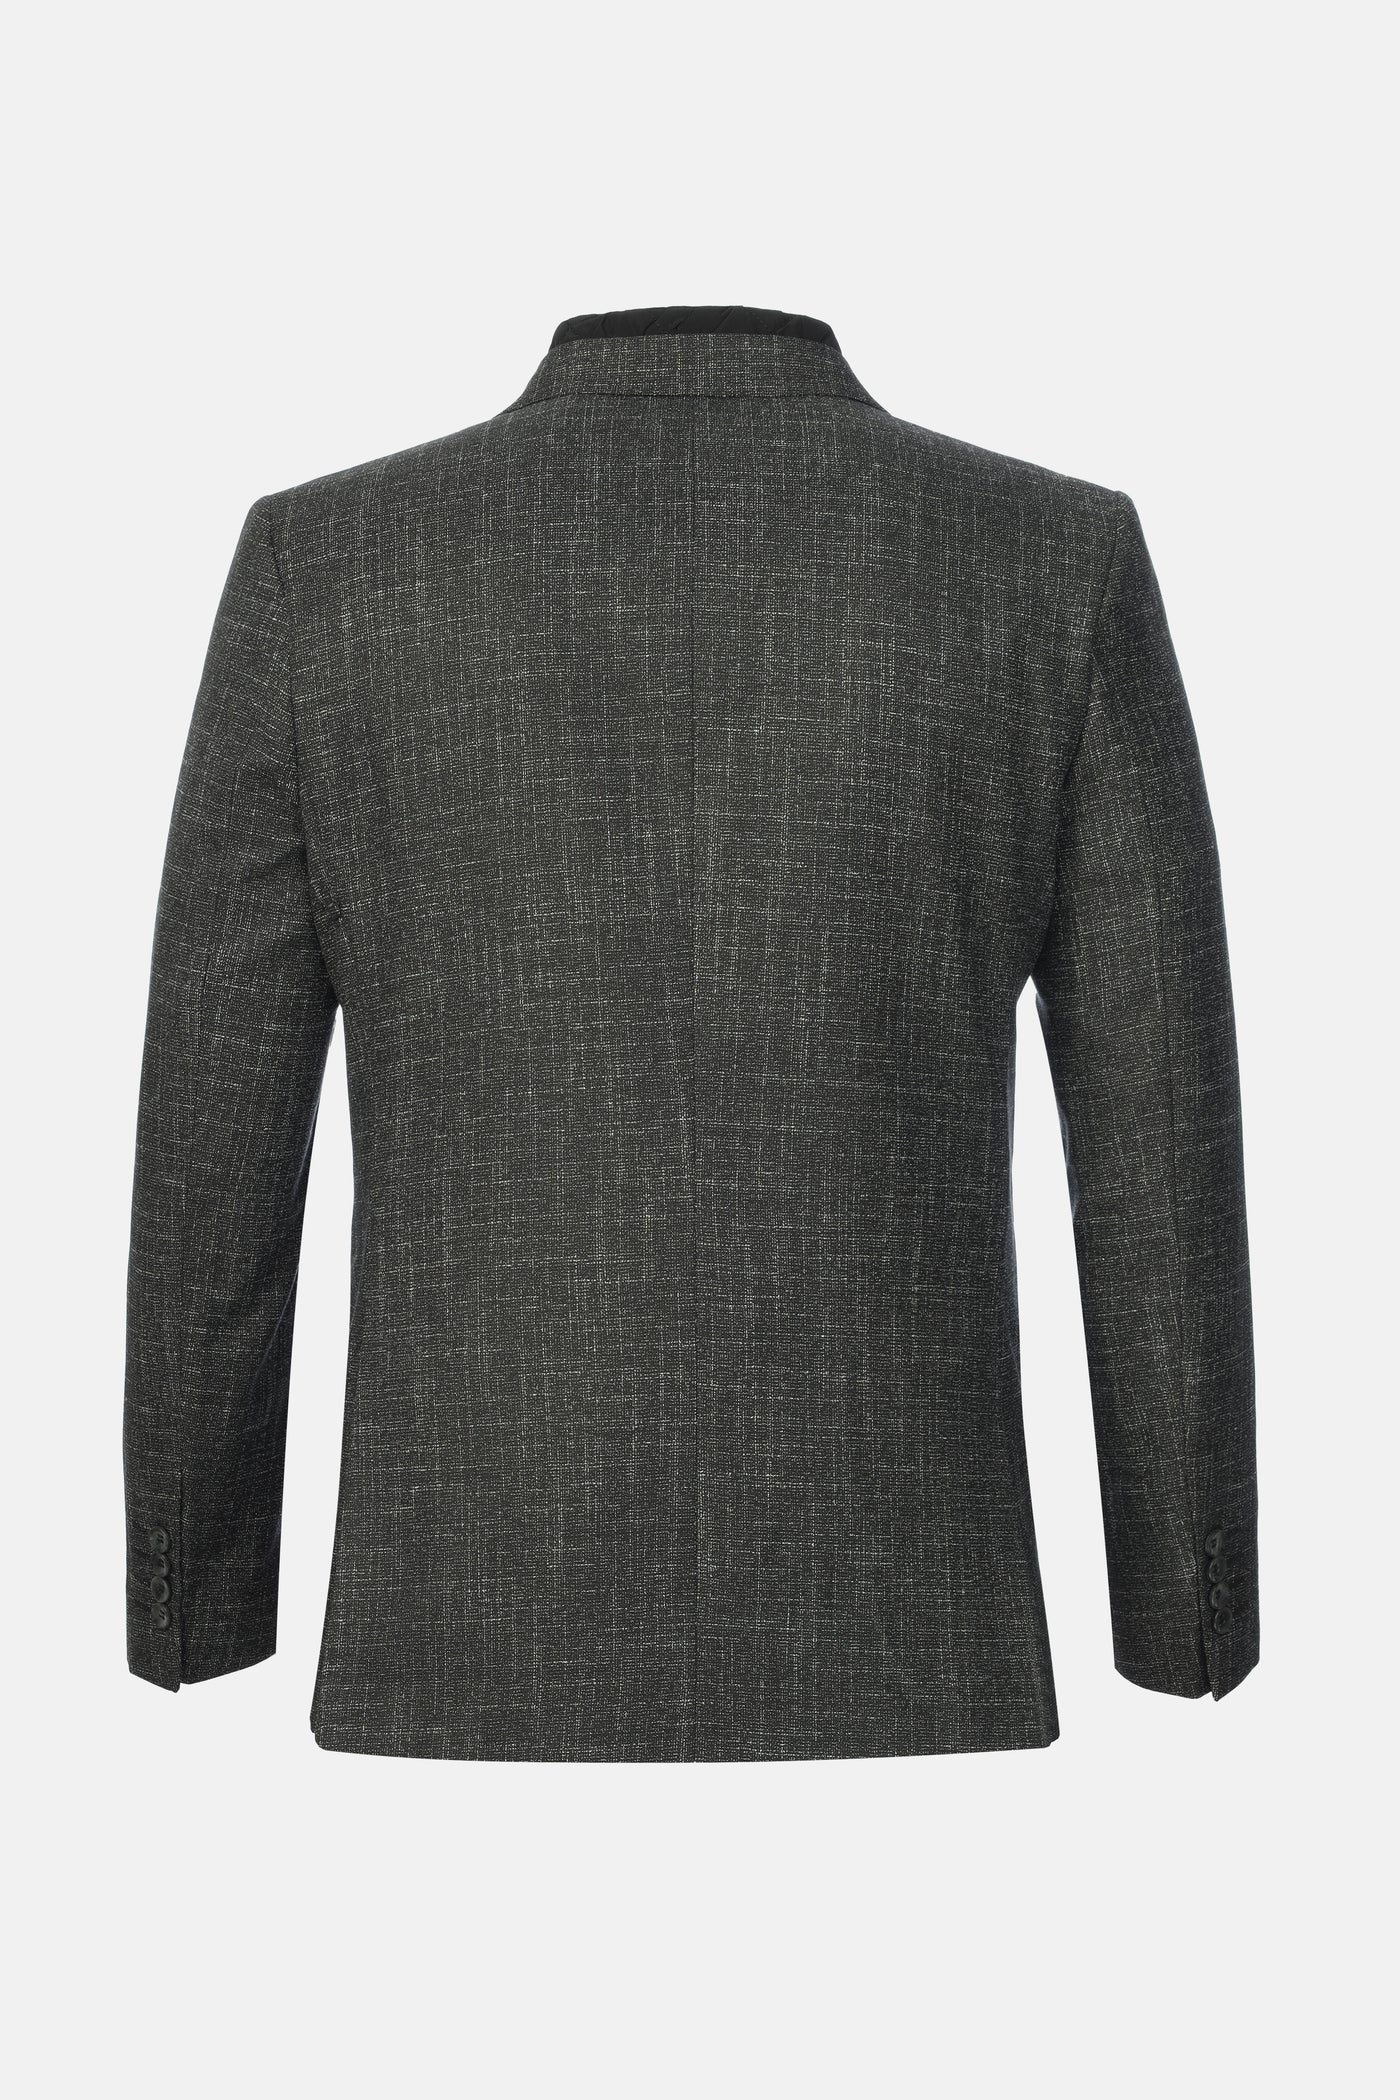 Woven Jaquard  Black & White Blazer with removable padded piece